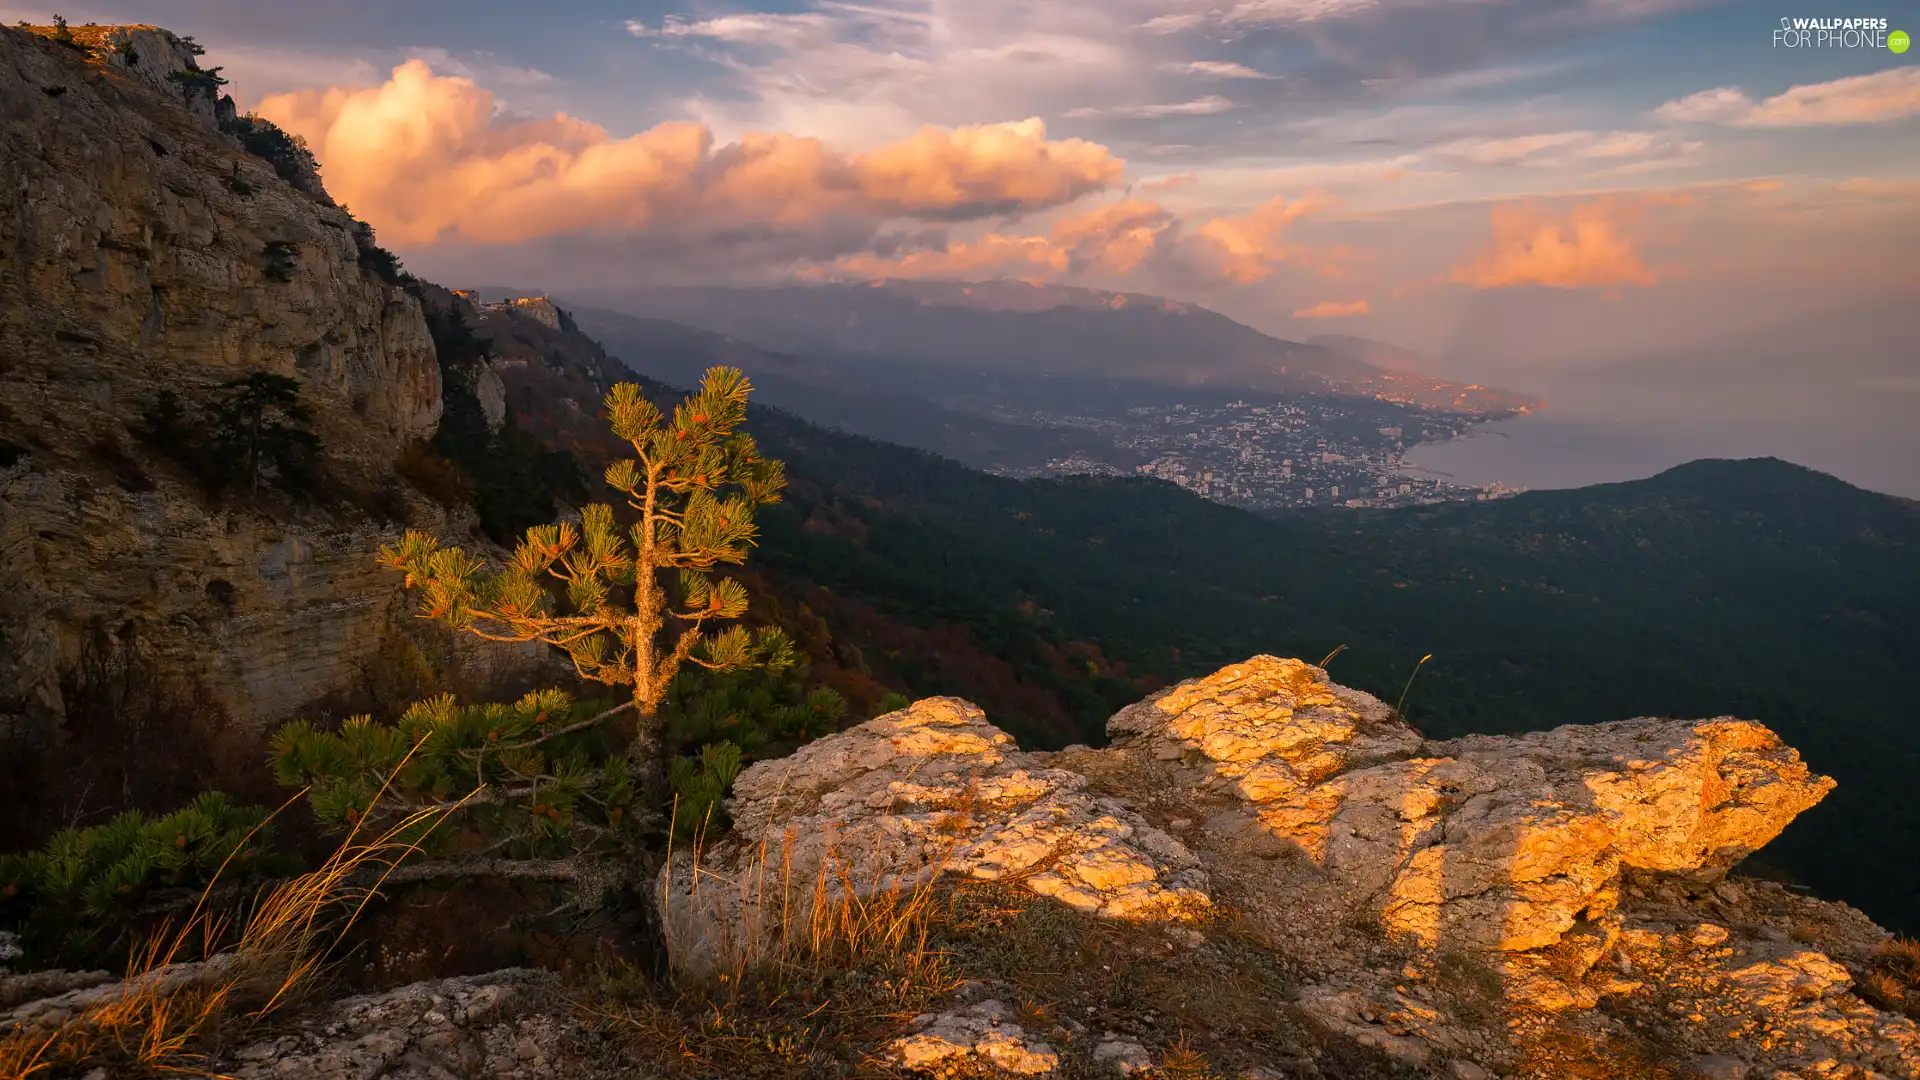 pine, Mountains, Town, clouds, Valley, rocks